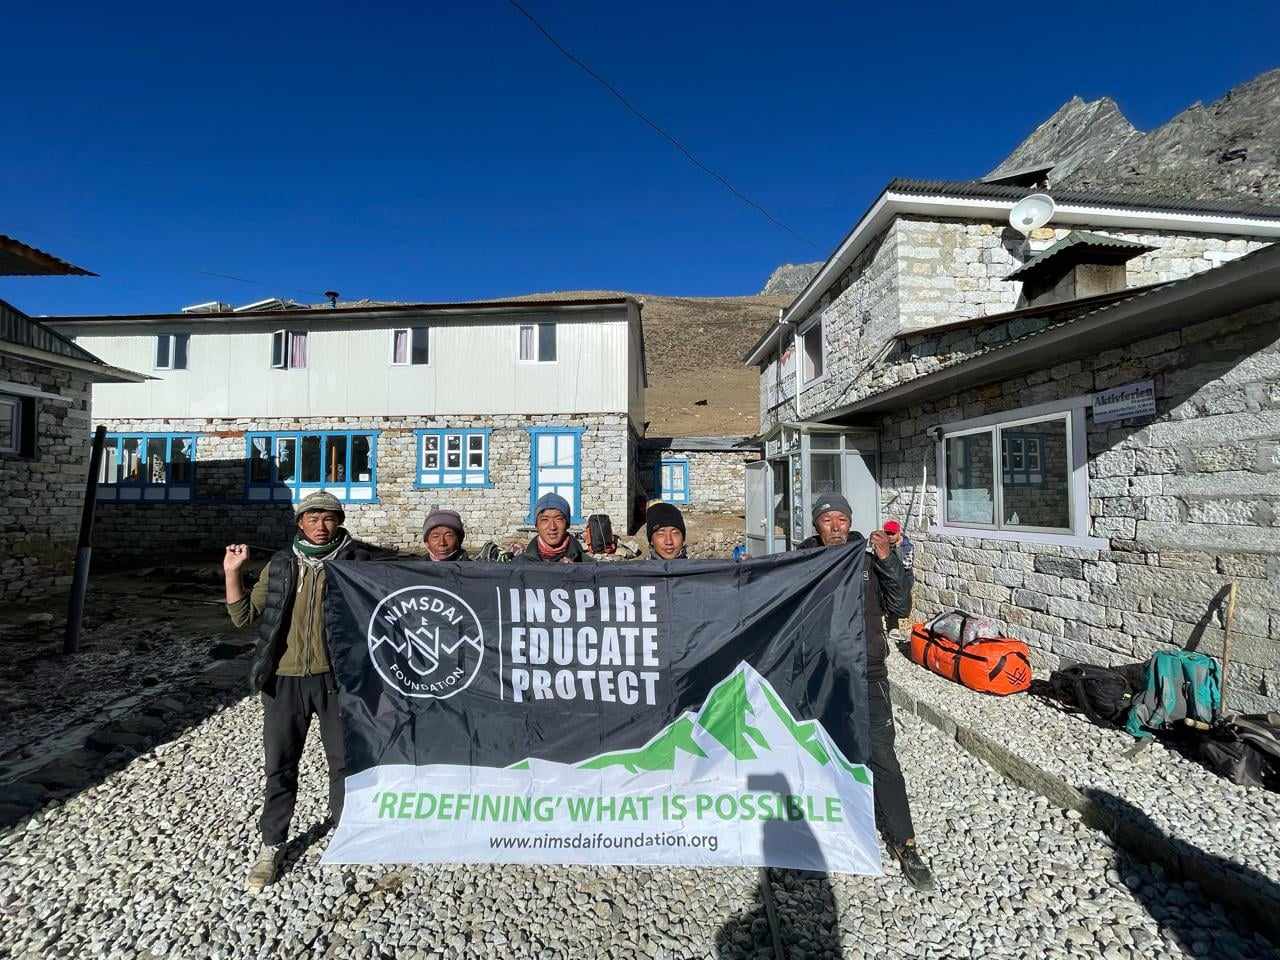 NIMSDAI Foundation collaborates with local govt for Lobuche Porter’s Accommodation Project